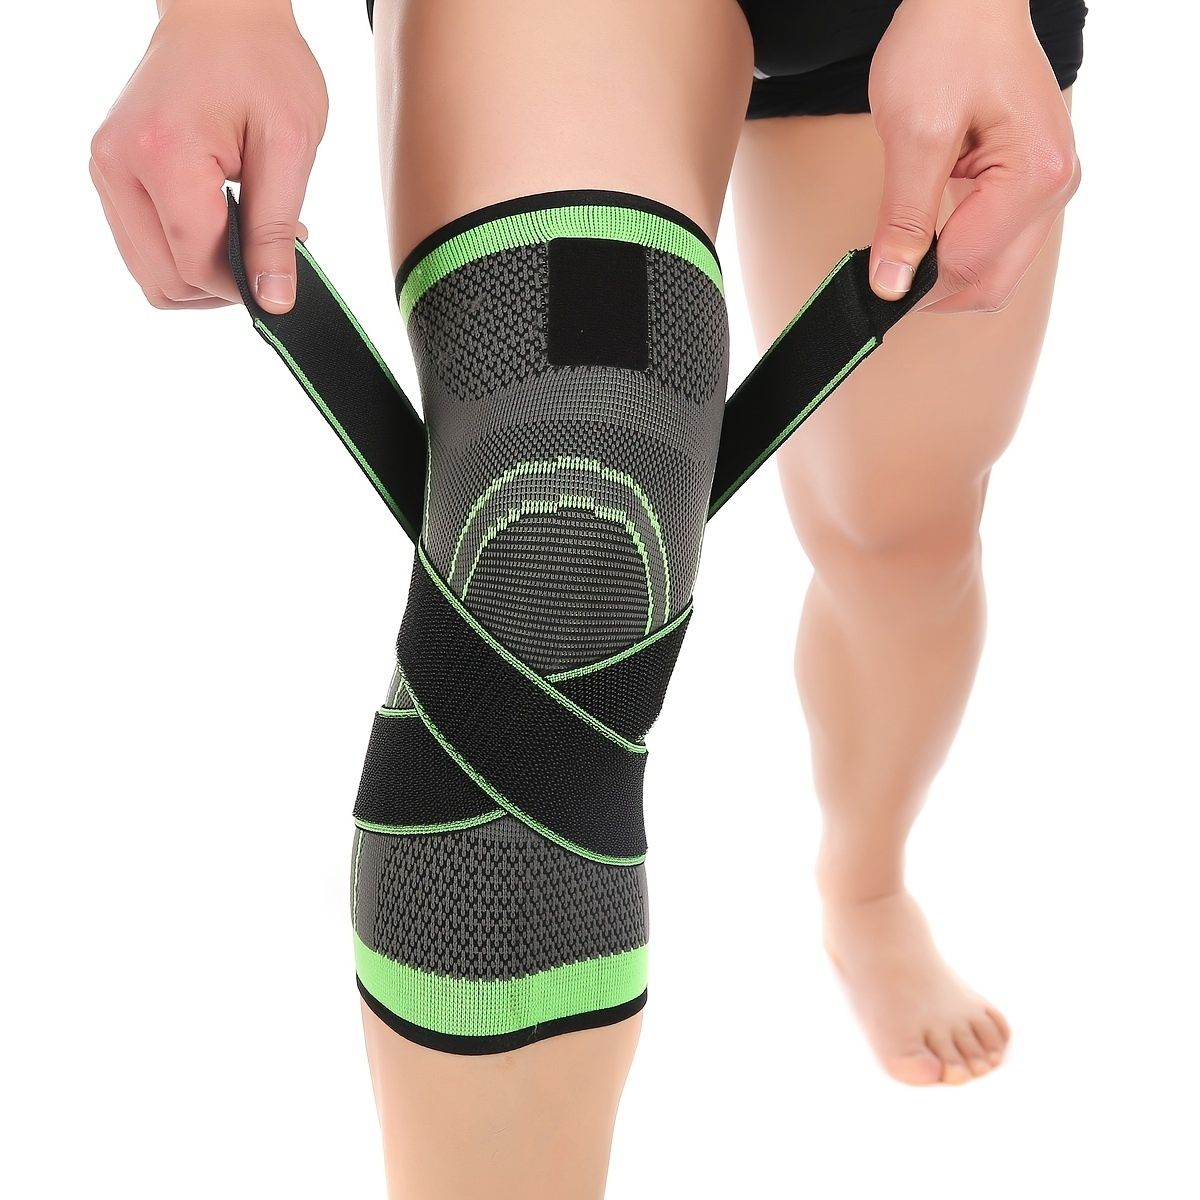 order a size up 1pc knee sleeve knee compression pads for improving circulation knee pain relief for men women knee support arthritis relief running cycling adjustable strap wrap exercise equipment 0